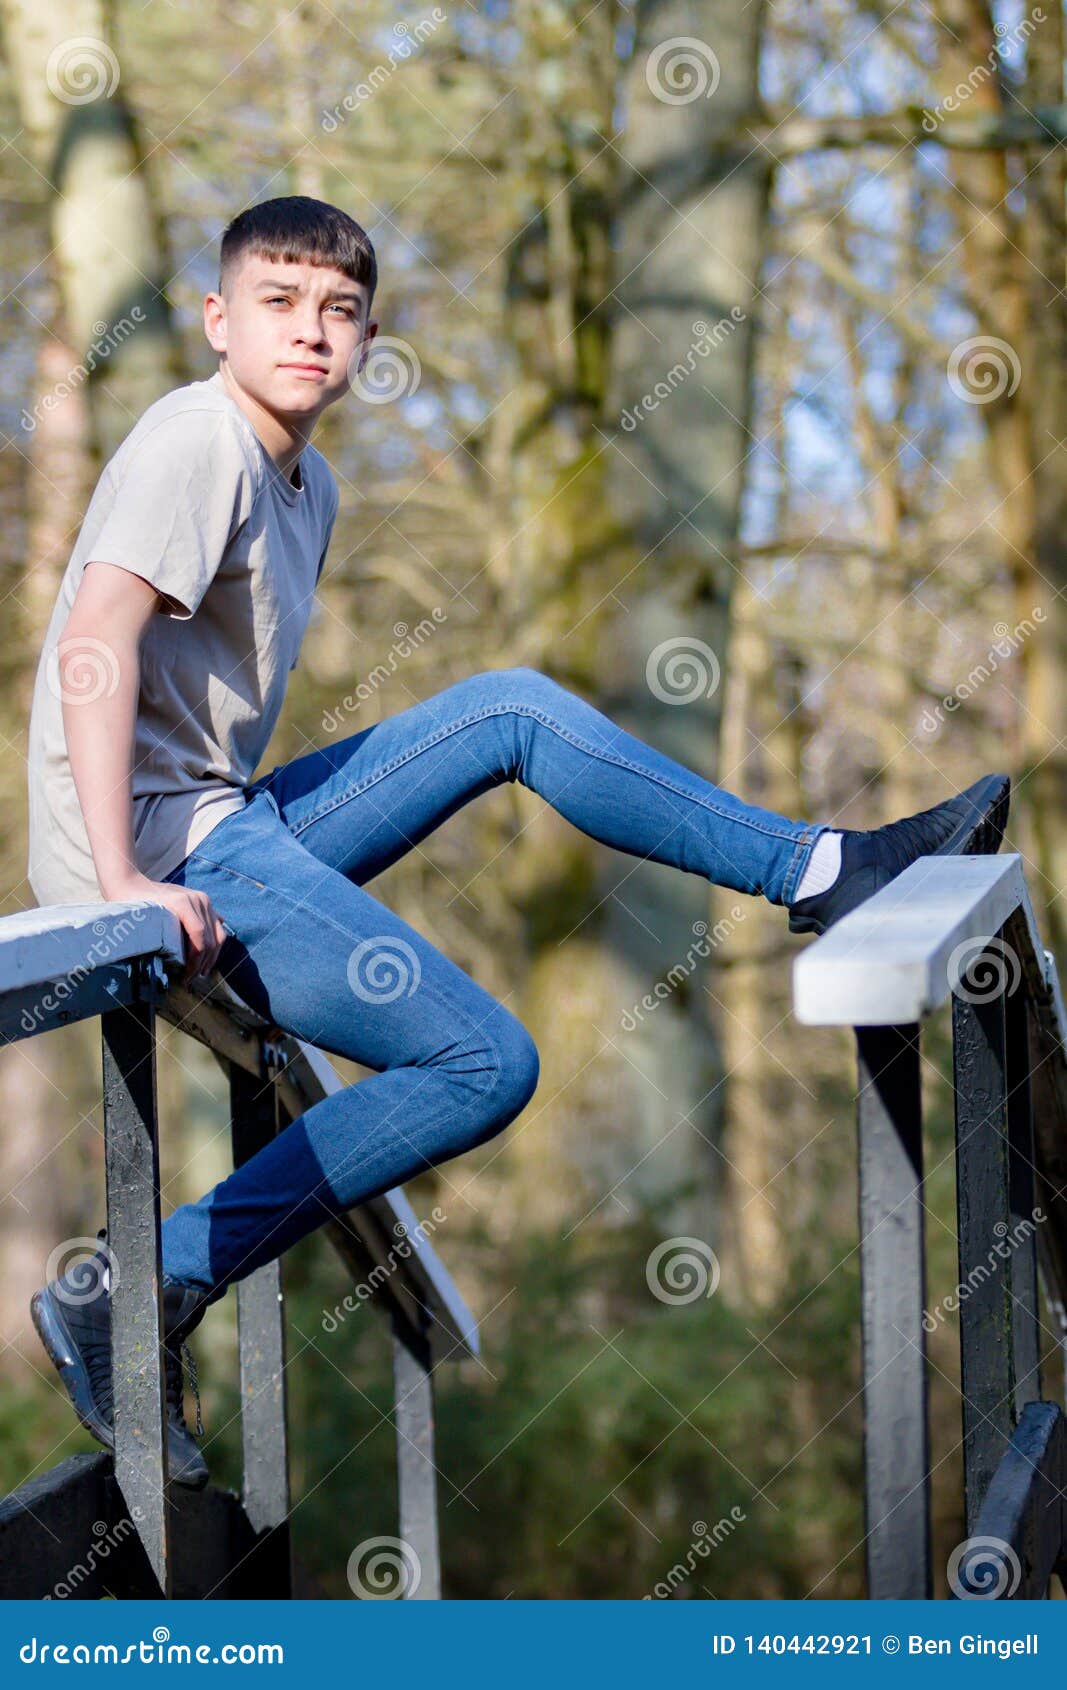 Teenage Boy Outside on a Bright Spring Day Stock Image - Image of aged ...